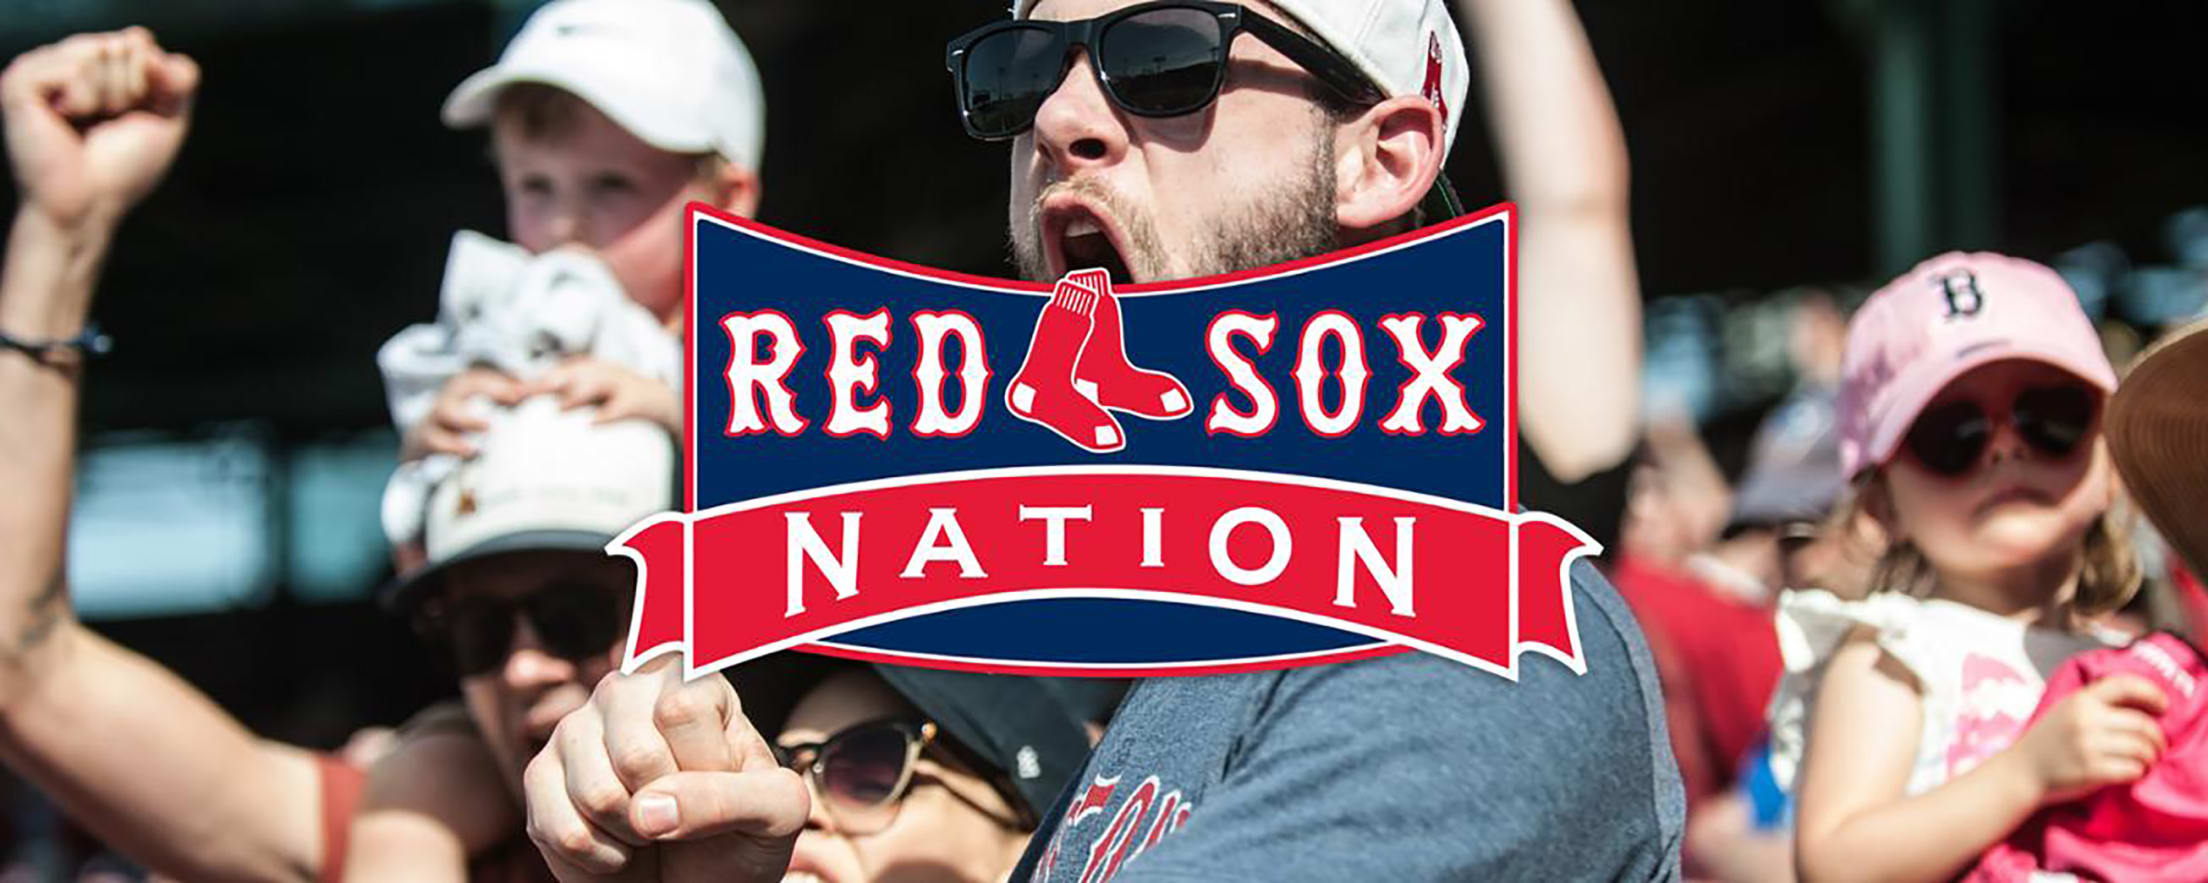 Sox 2014 Schedule!  Red sox, Red sox nation, Red sox baseball